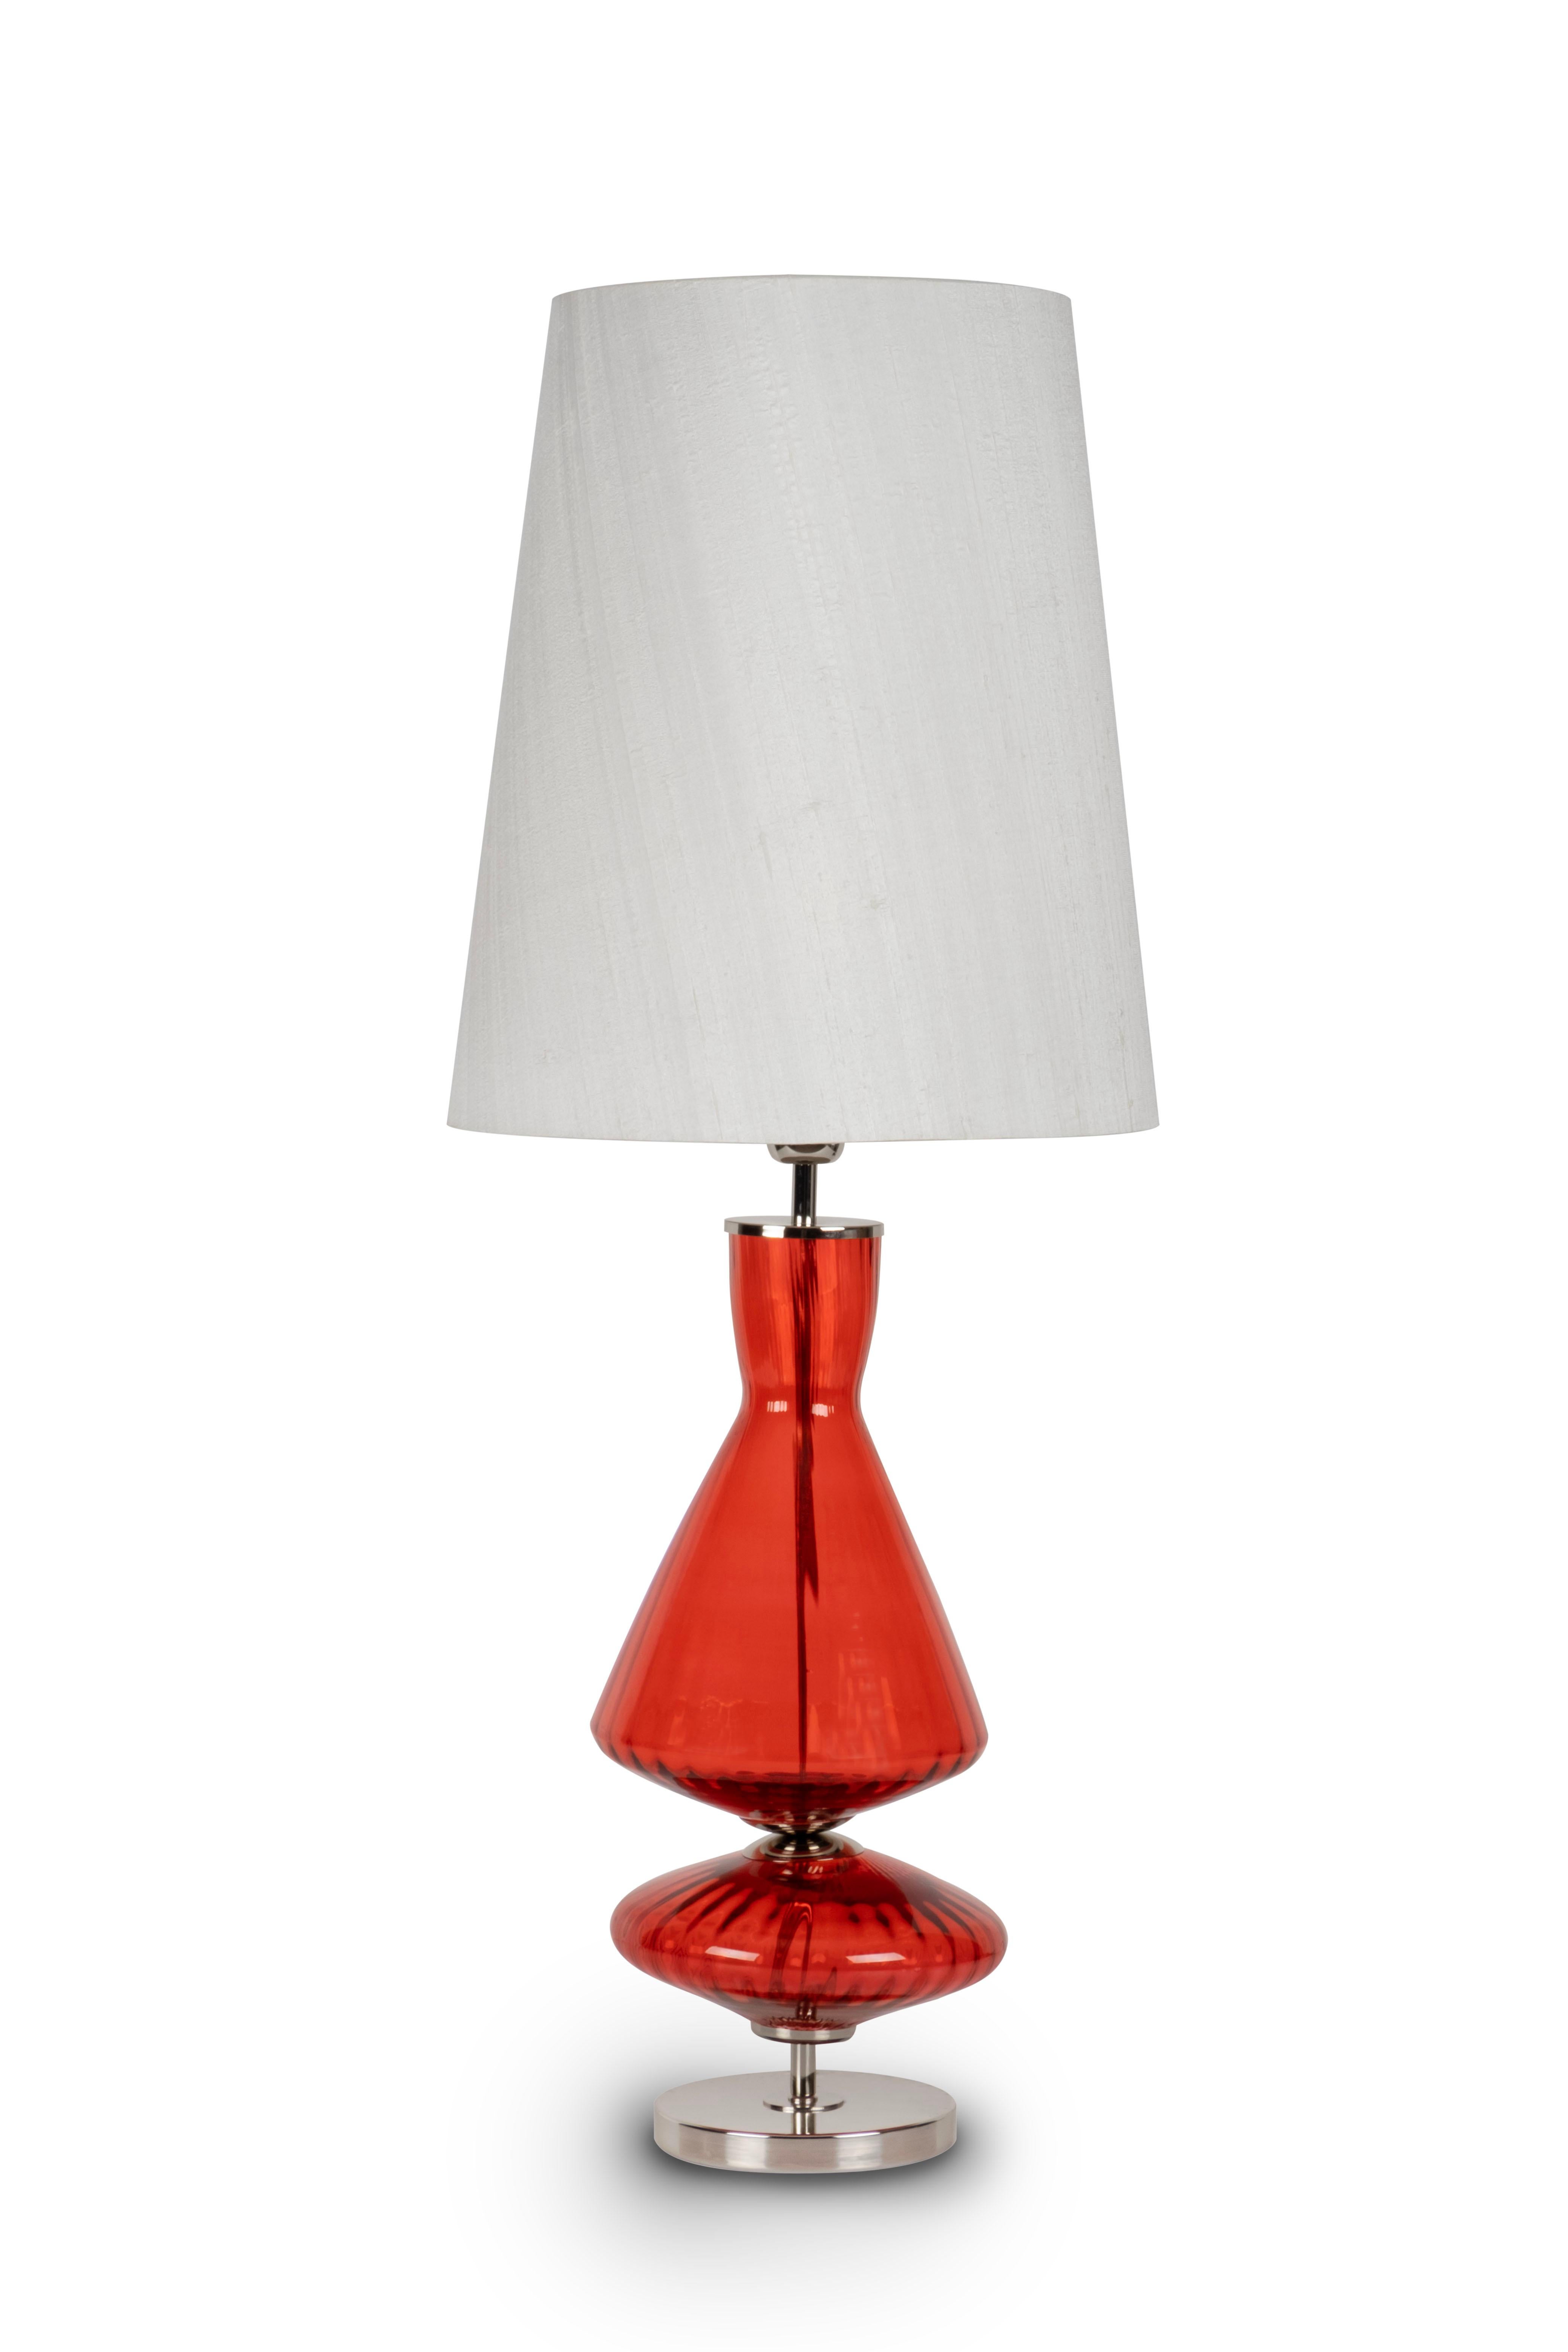 Portuguese Set/2 Art Deco Assis Table Lamps, White Lampshade, Handmade by Greenapple For Sale